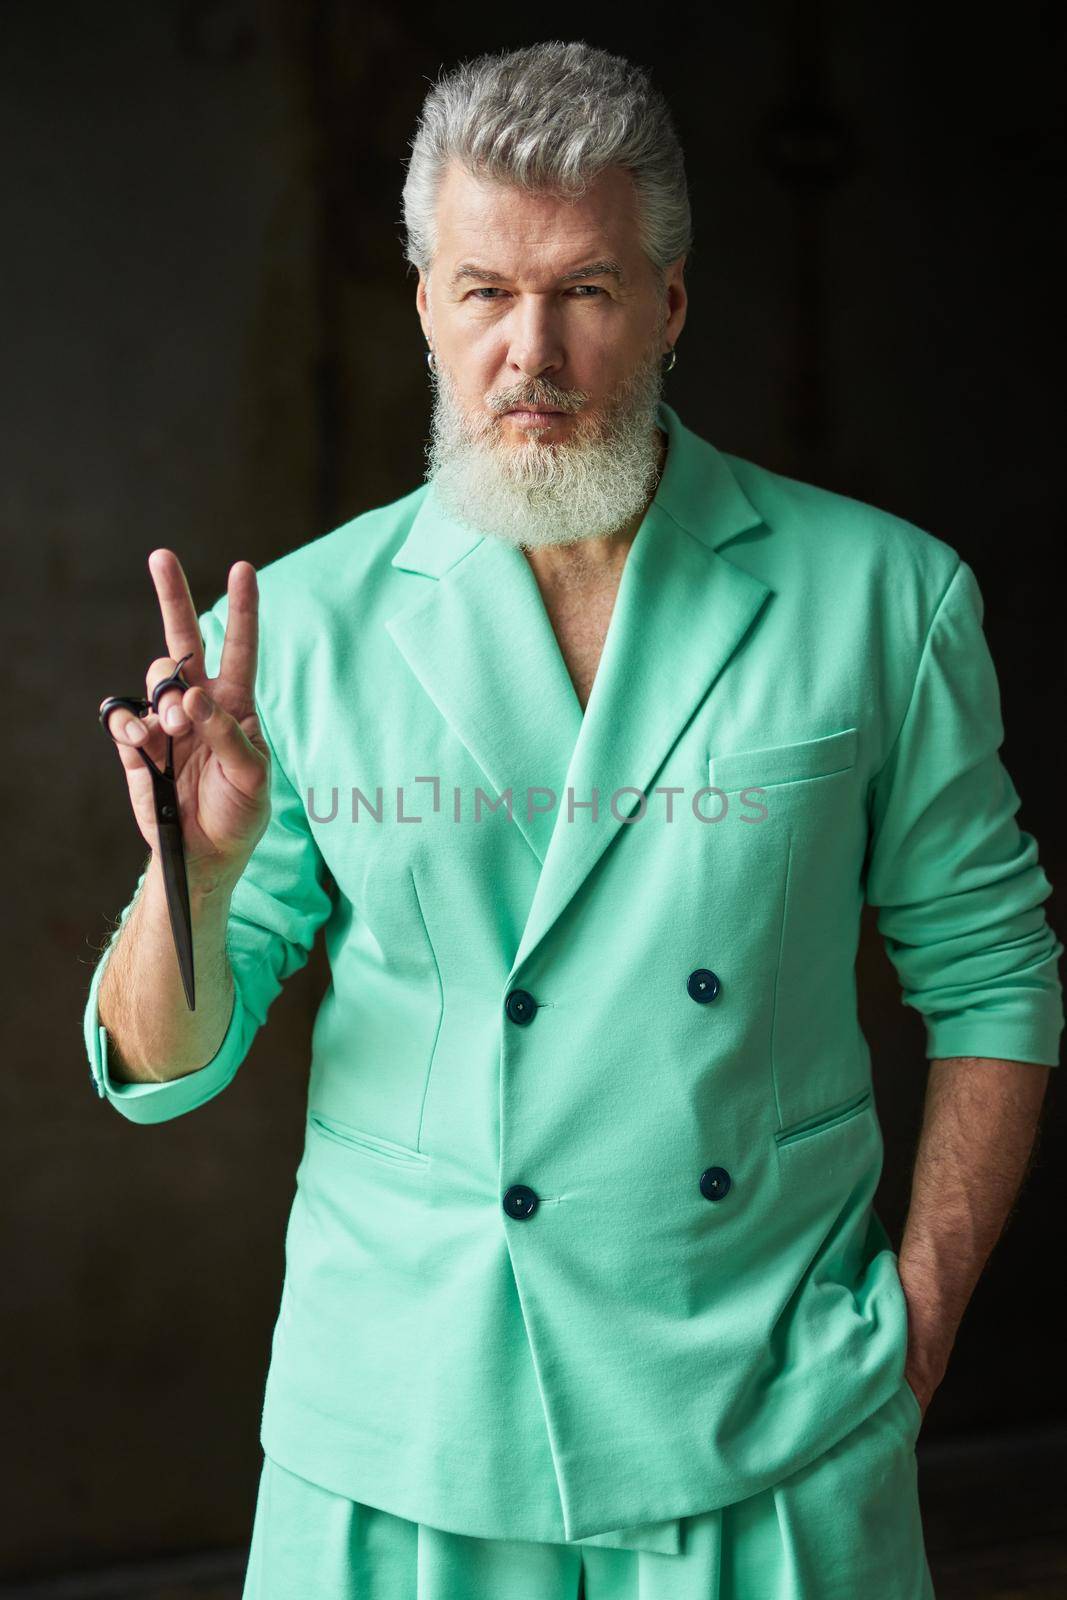 Cool gray haired middle aged man with beard wearing colorful outfit looking at camera, showing peace sign while holding sharp barber scissors, posing over dark background. Professional occupation